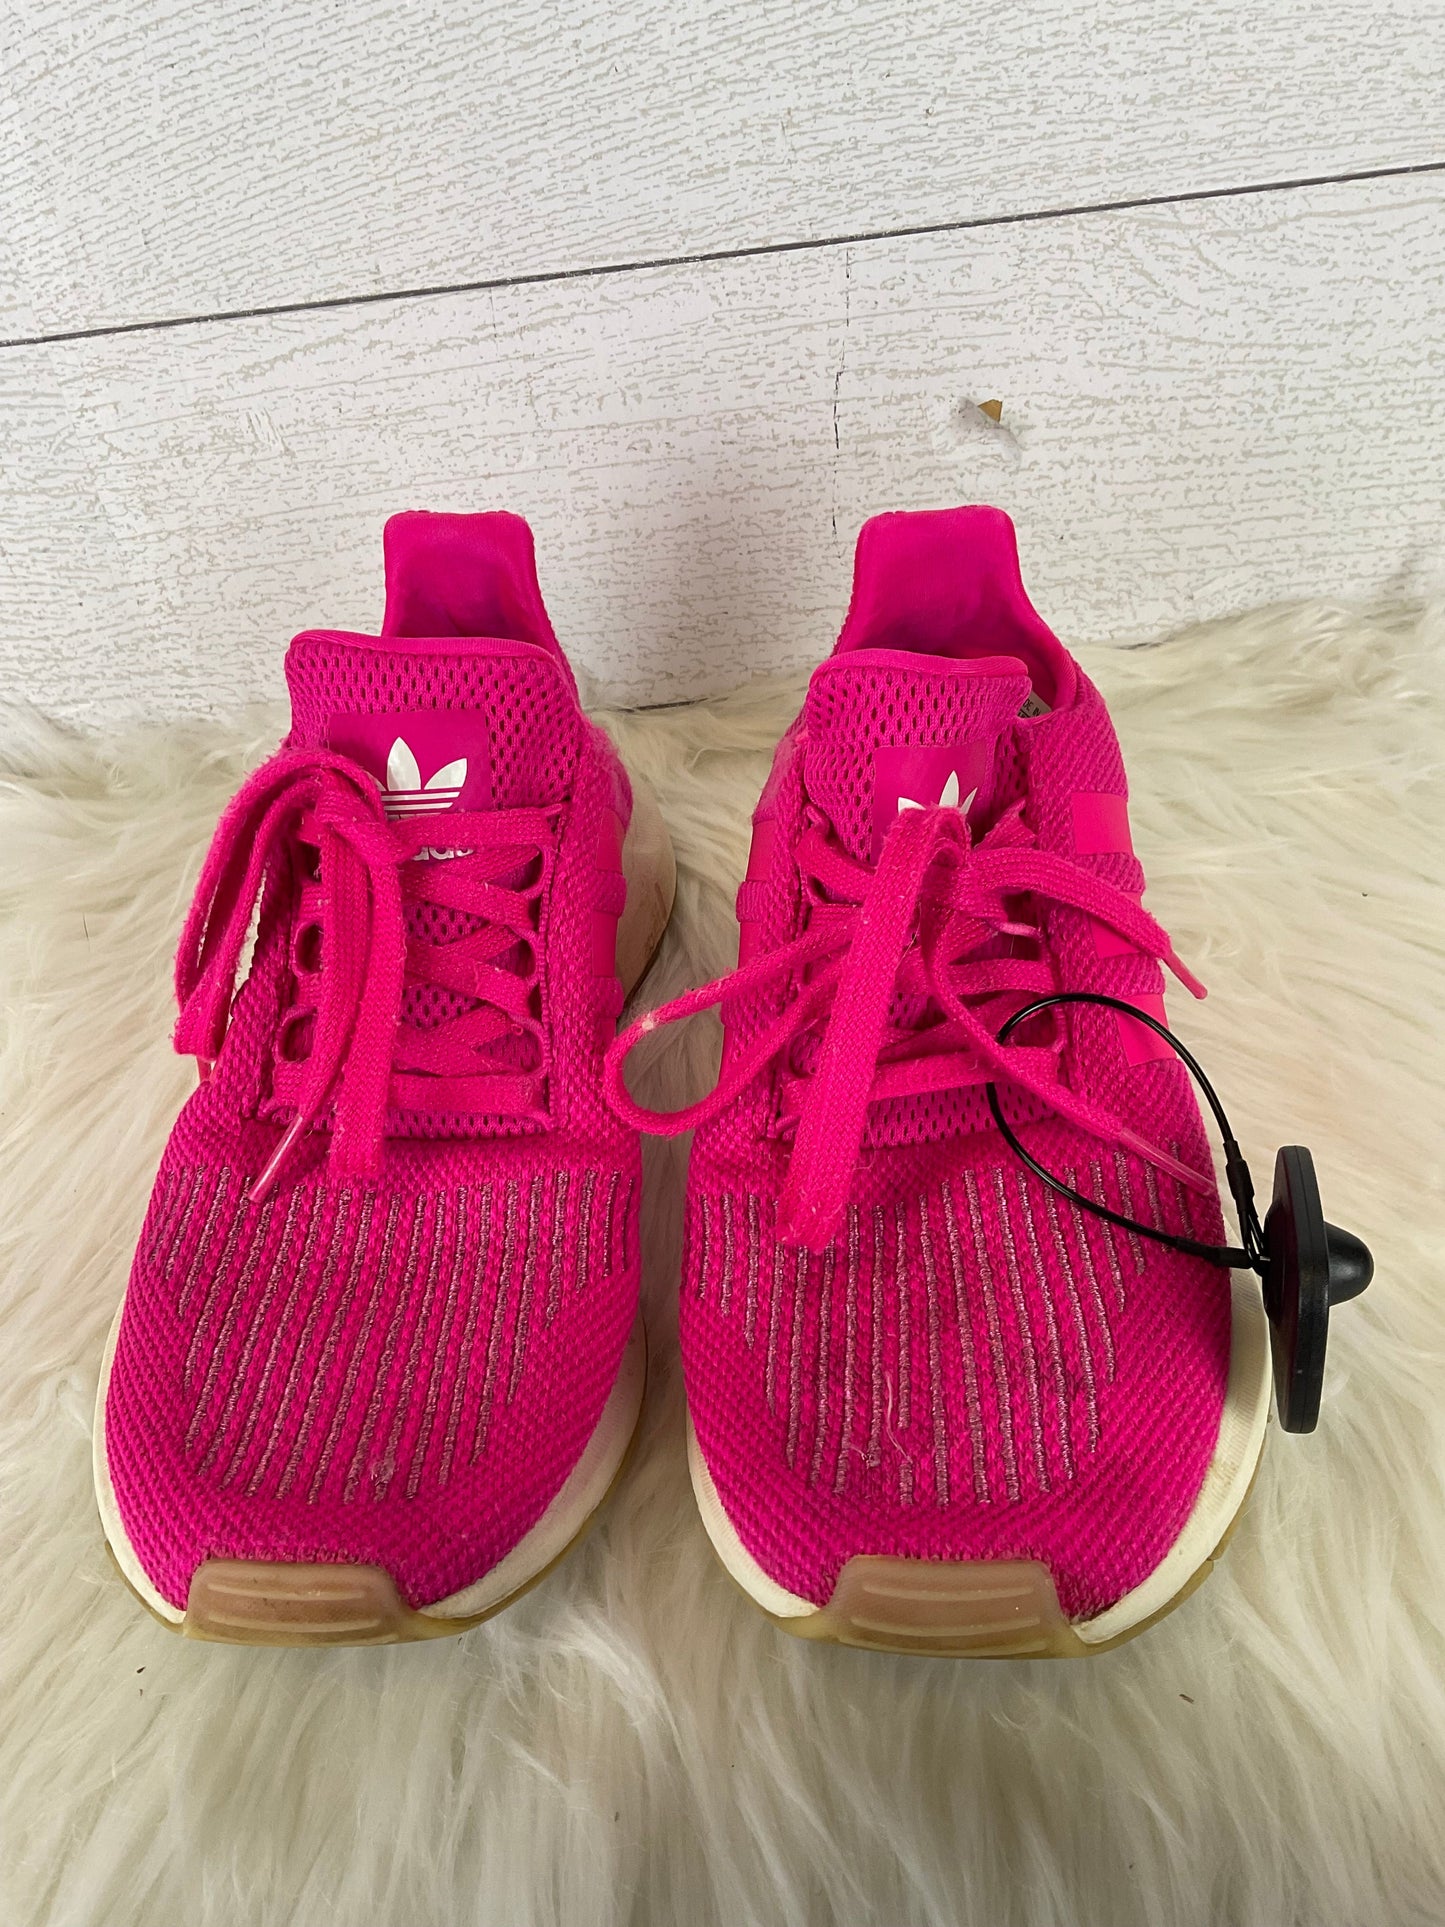 Pink Shoes Athletic Adidas, Size 8